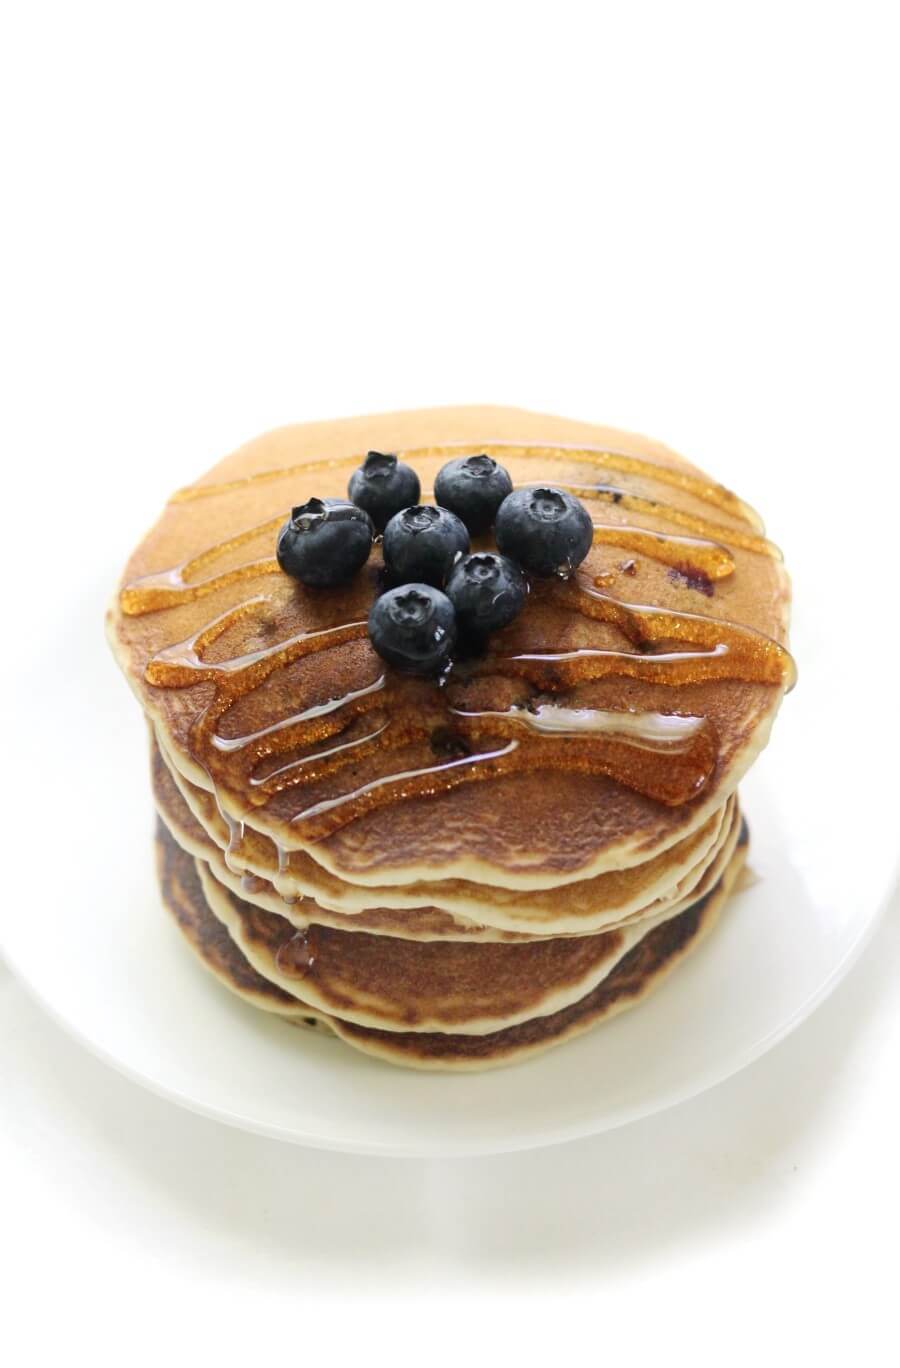 gluten-free blueberry pancakes with syrup